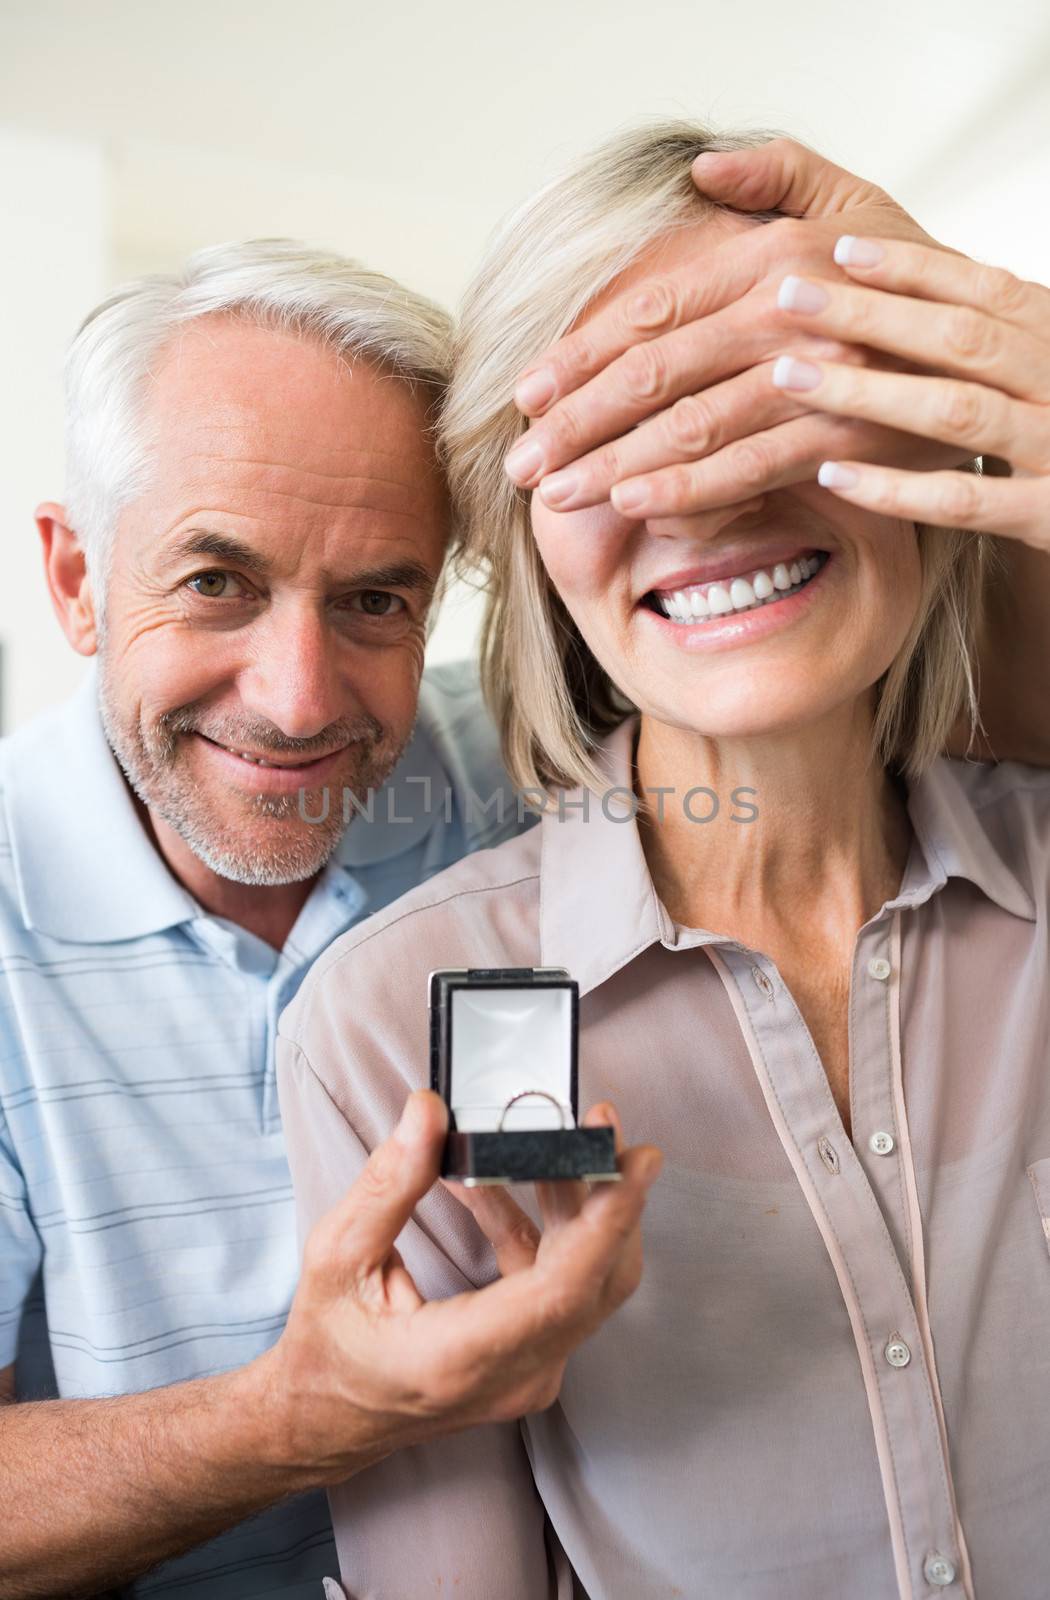 Closeup portrait of a smiling man surprising woman with a wedding ring